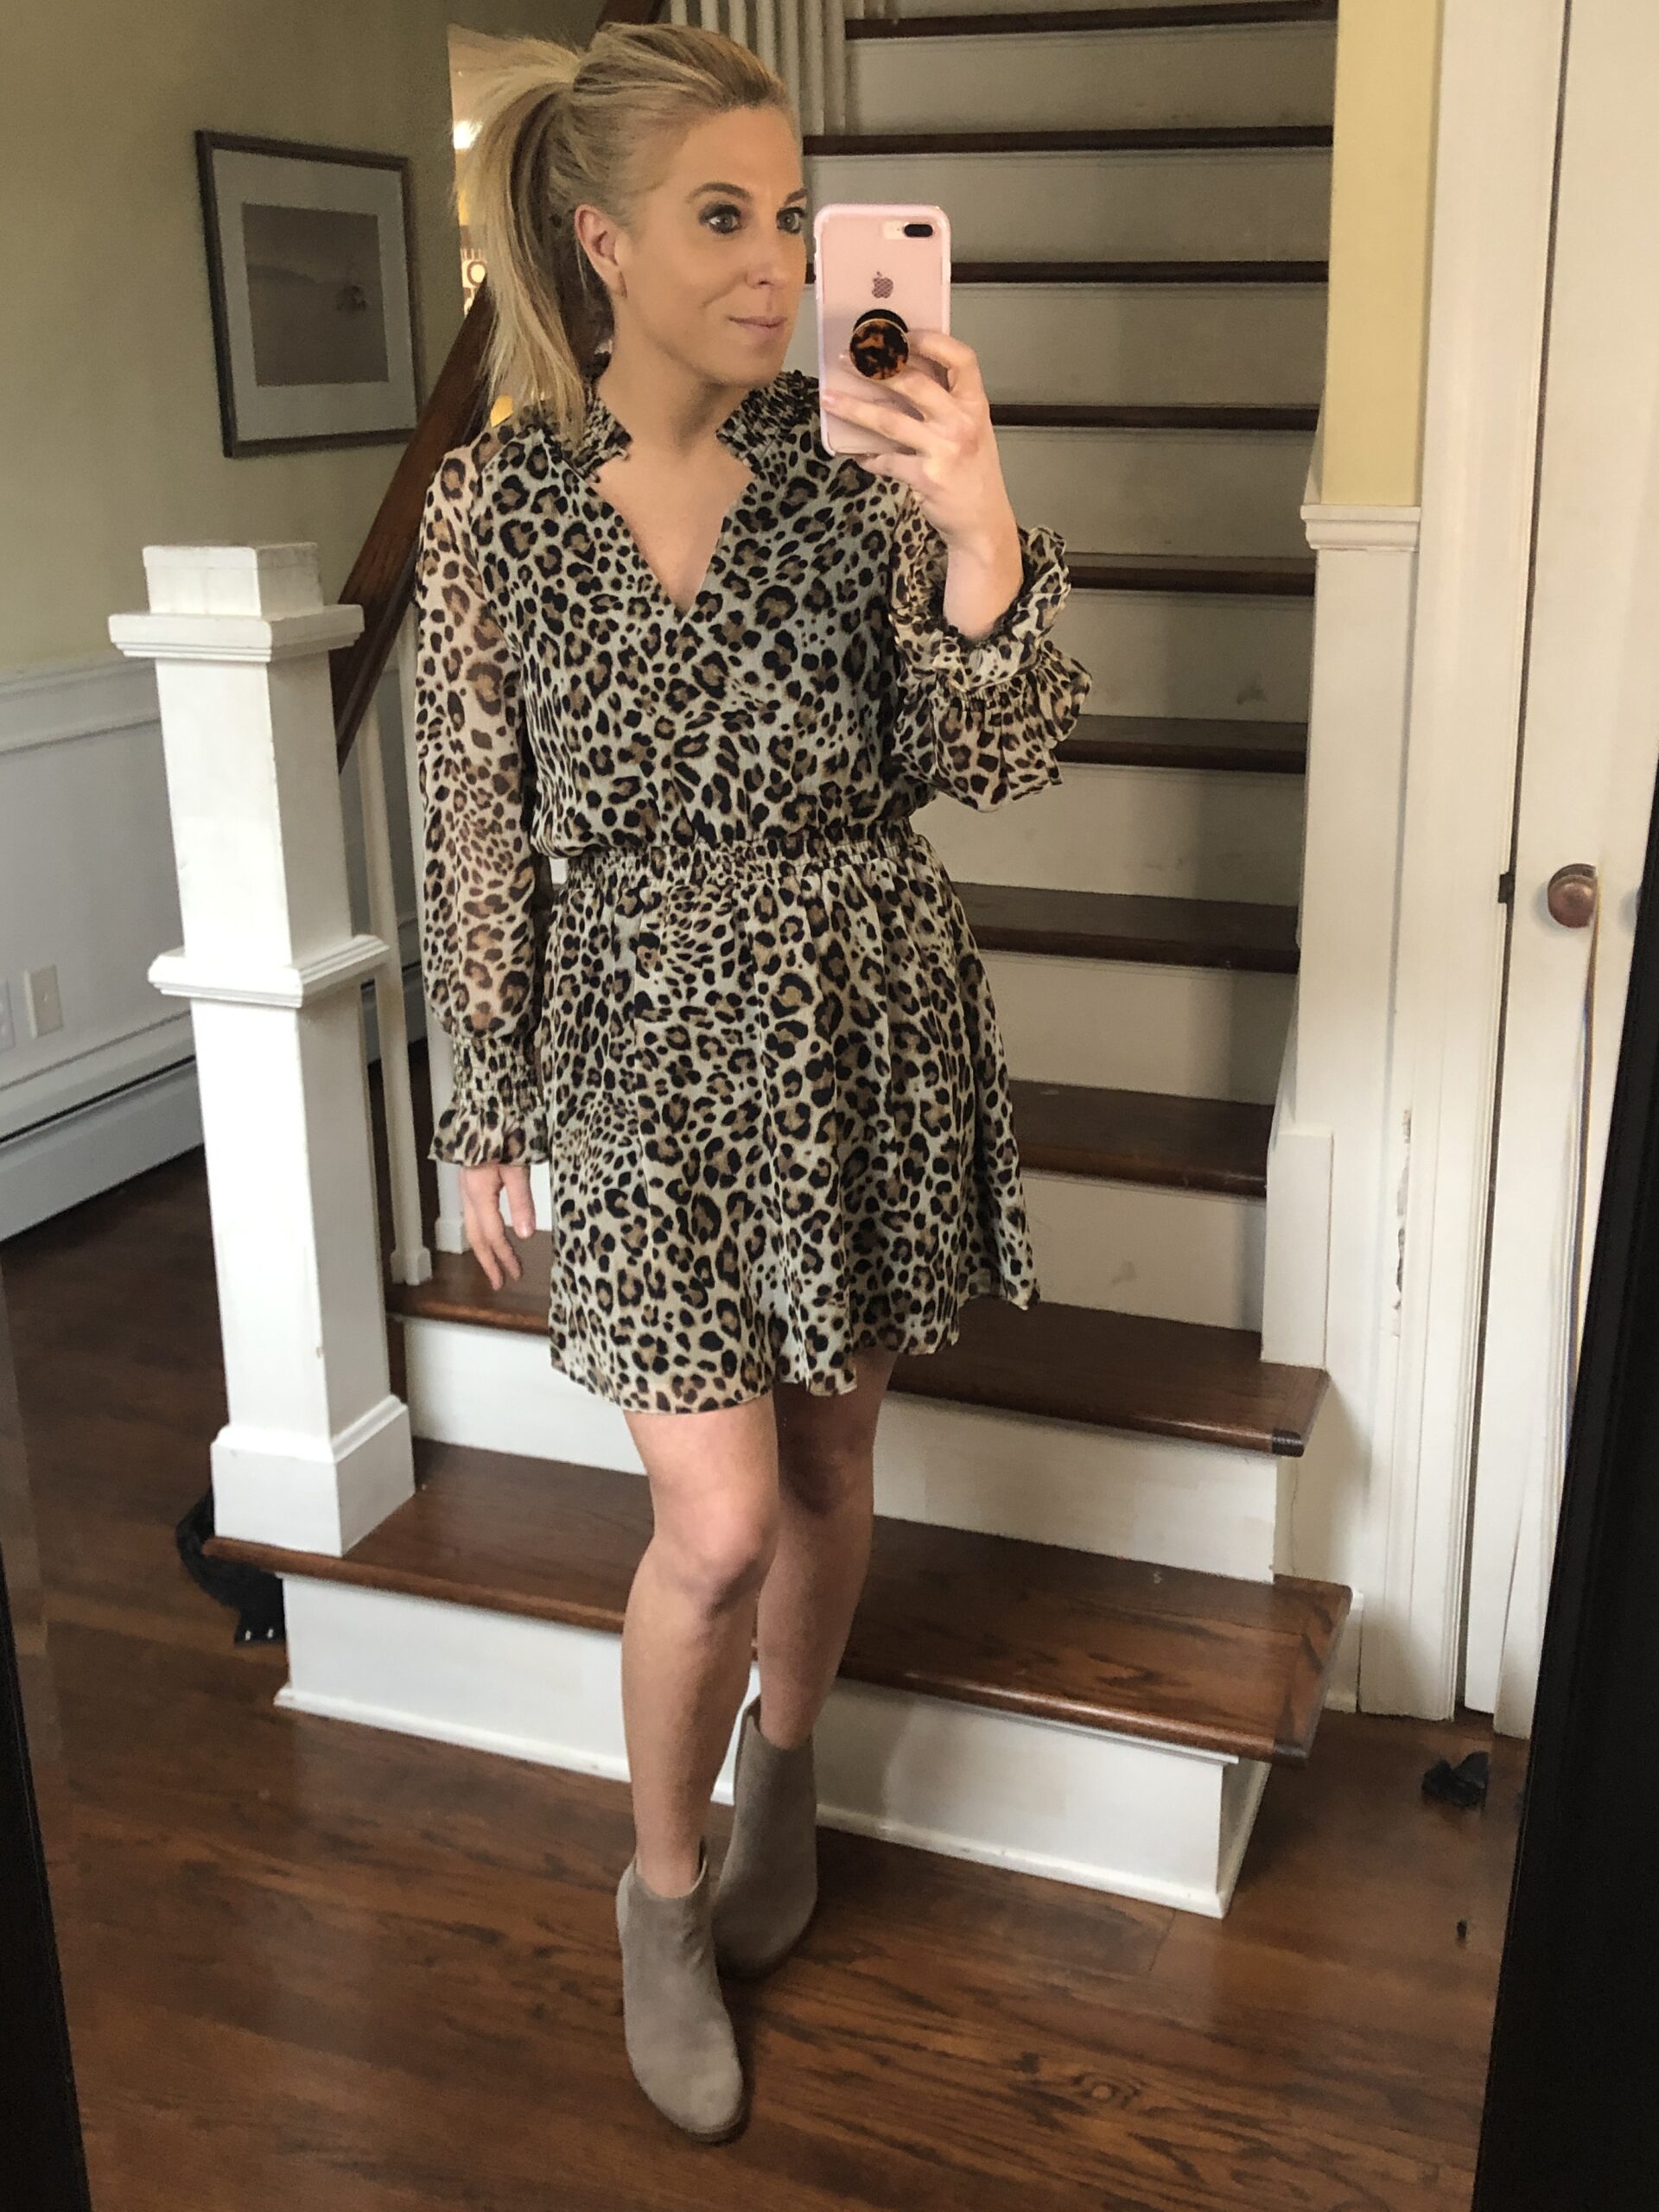 Leopard Print Dress: 5 Ways to Style - Stylish Life for Moms